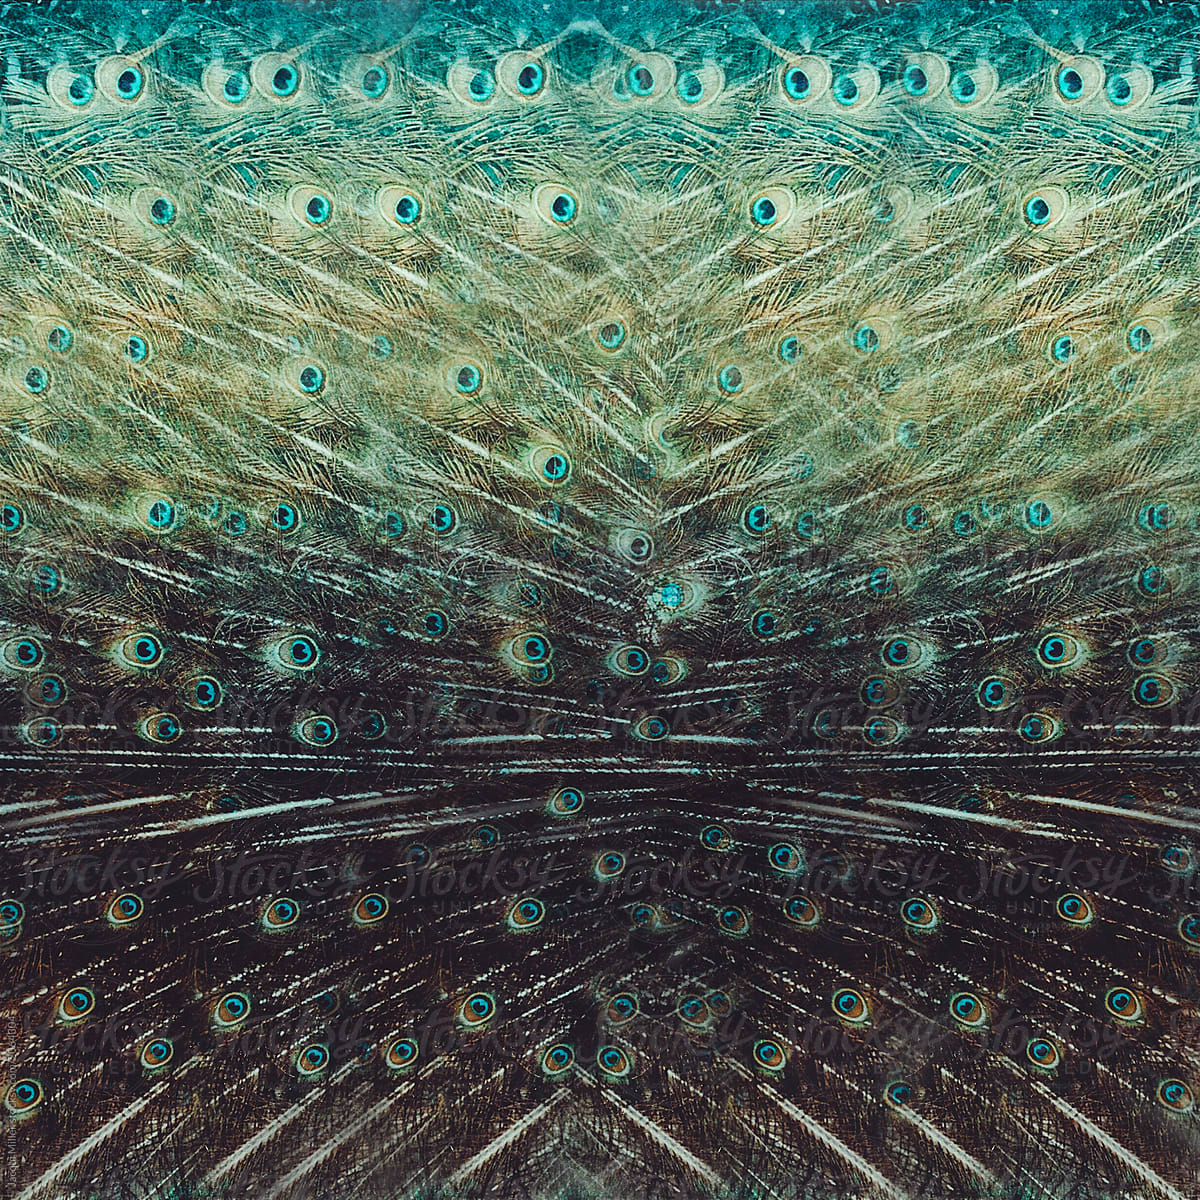 Abstract Peacock feather pattern